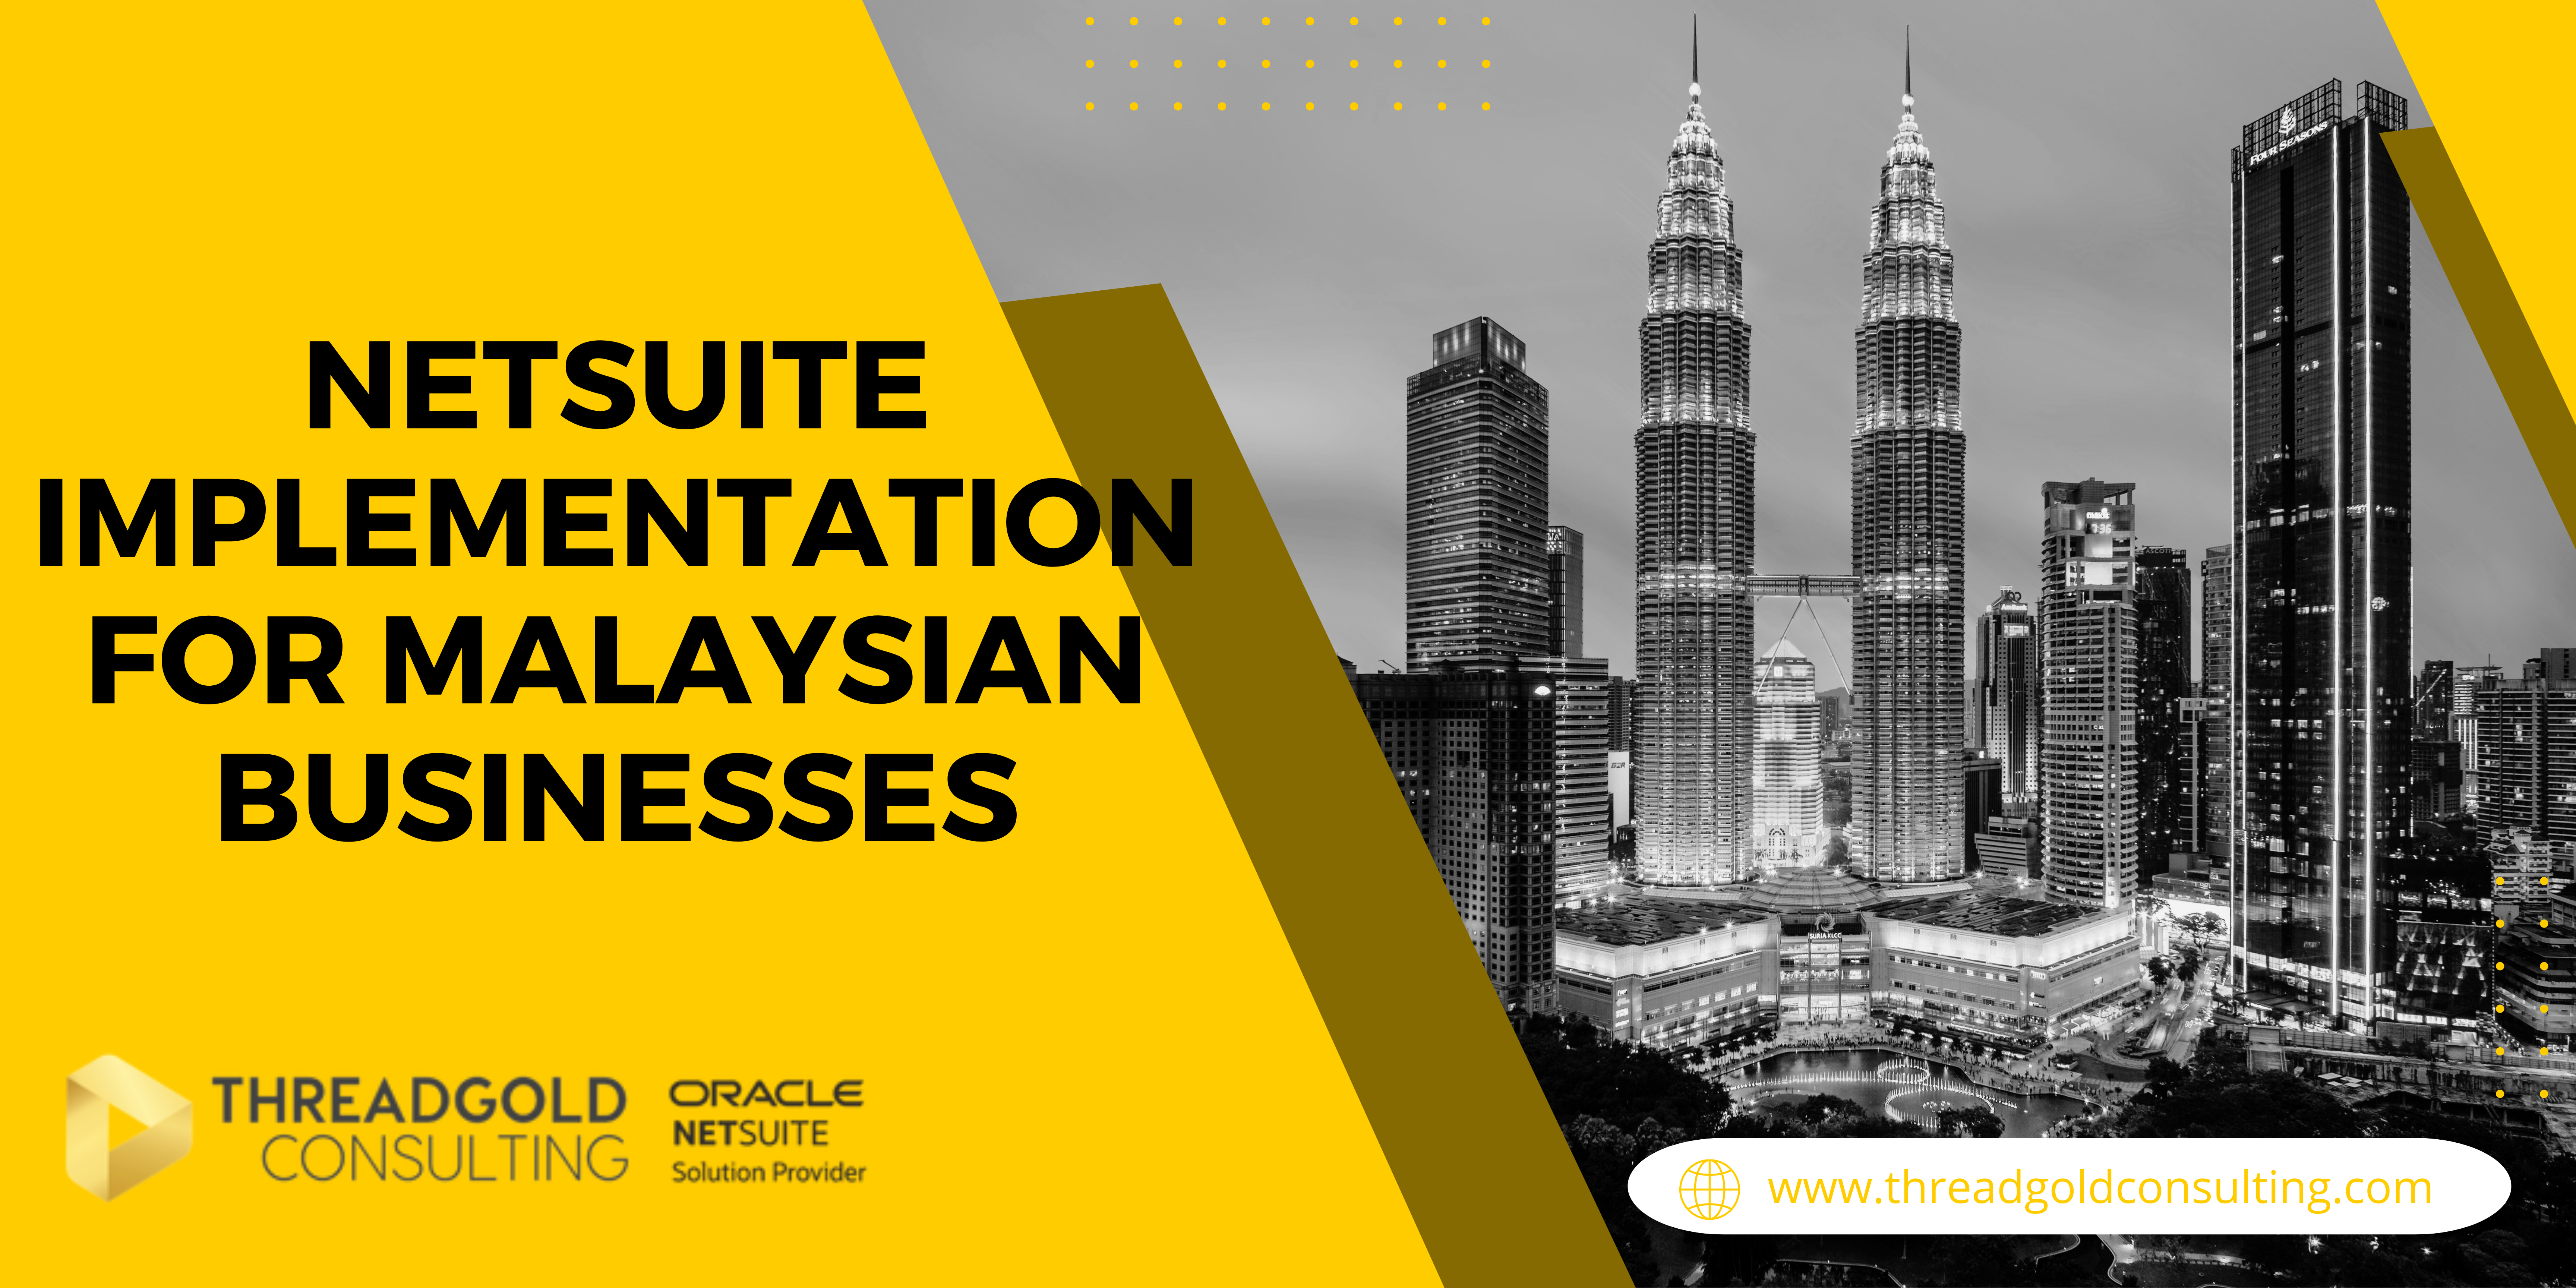 NetSuite Implementation for Malaysian Businesses: A CIO's Blueprint for Success